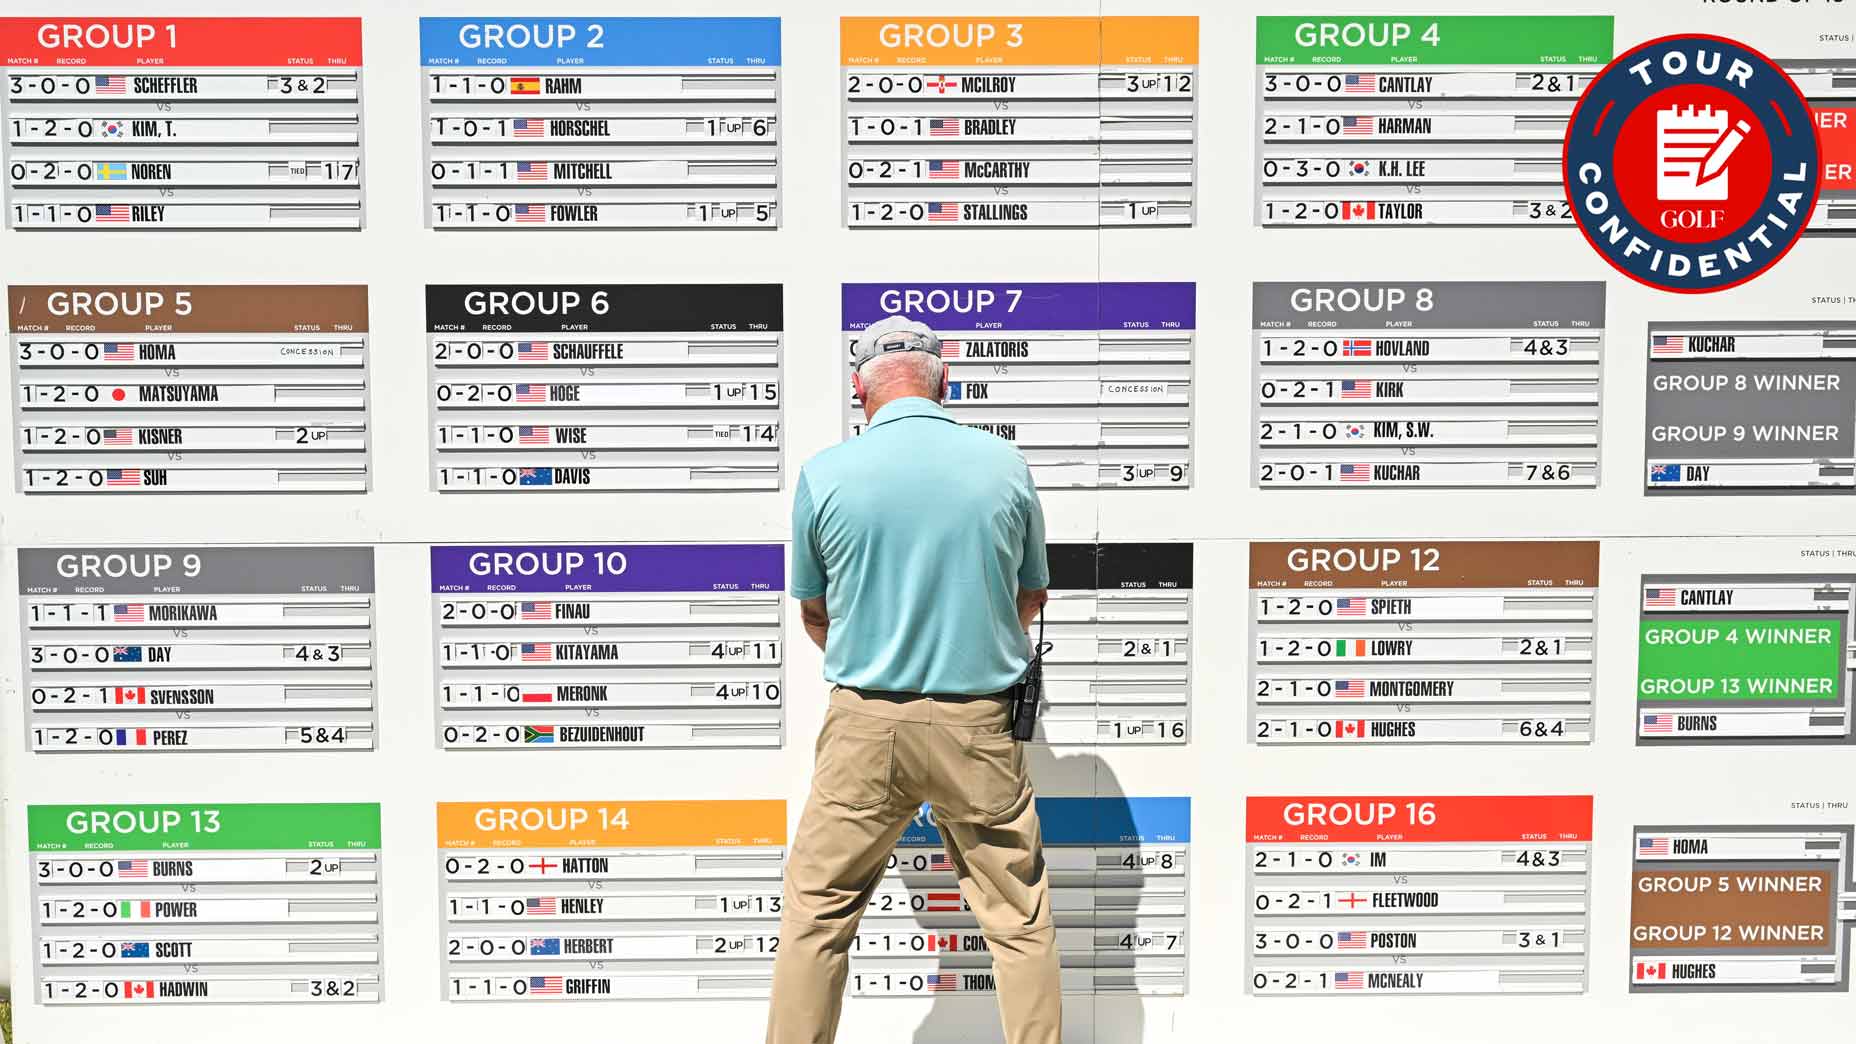 A volunteer is seen updating the bracket group board during the third day of the World Golf Championships-Dell Technologies Match Play at Austin Country Club on March 24, 2023 in Austin, Texas.